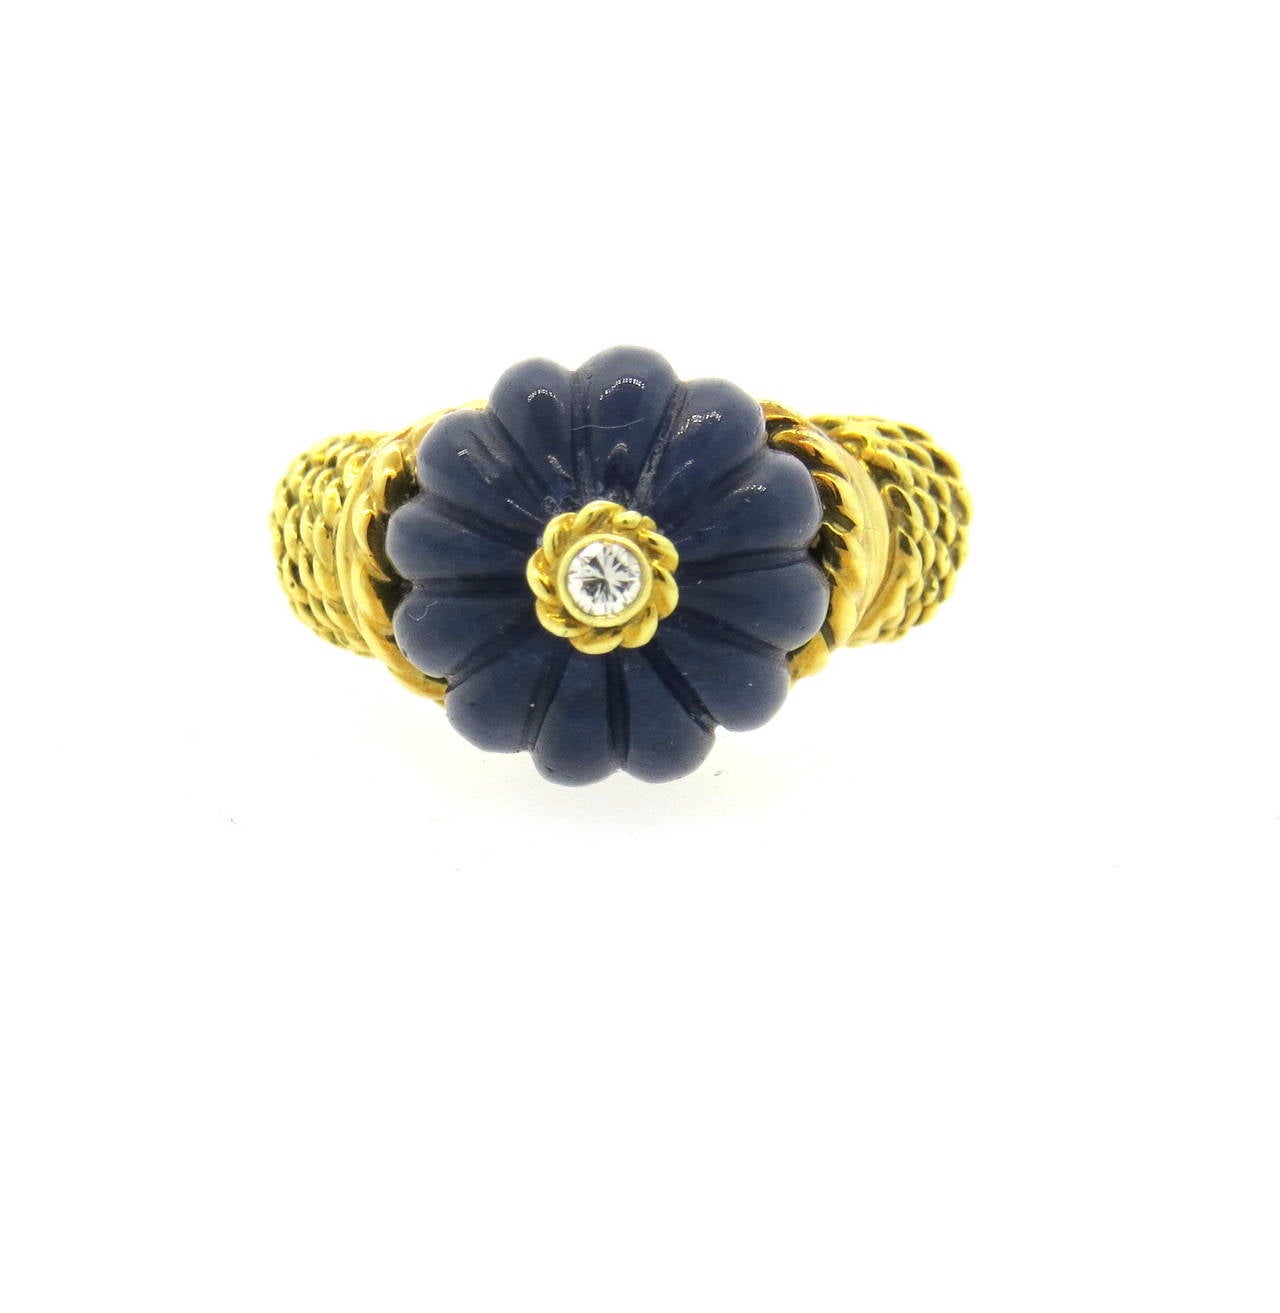 An 18k yellow gold ring set with a carved lapis 14.8mm in diameter and a G/VS diamond weighing approximately 0.08ct.  The ring is a size 7, sits 16mm from the finger.  Marked 18k